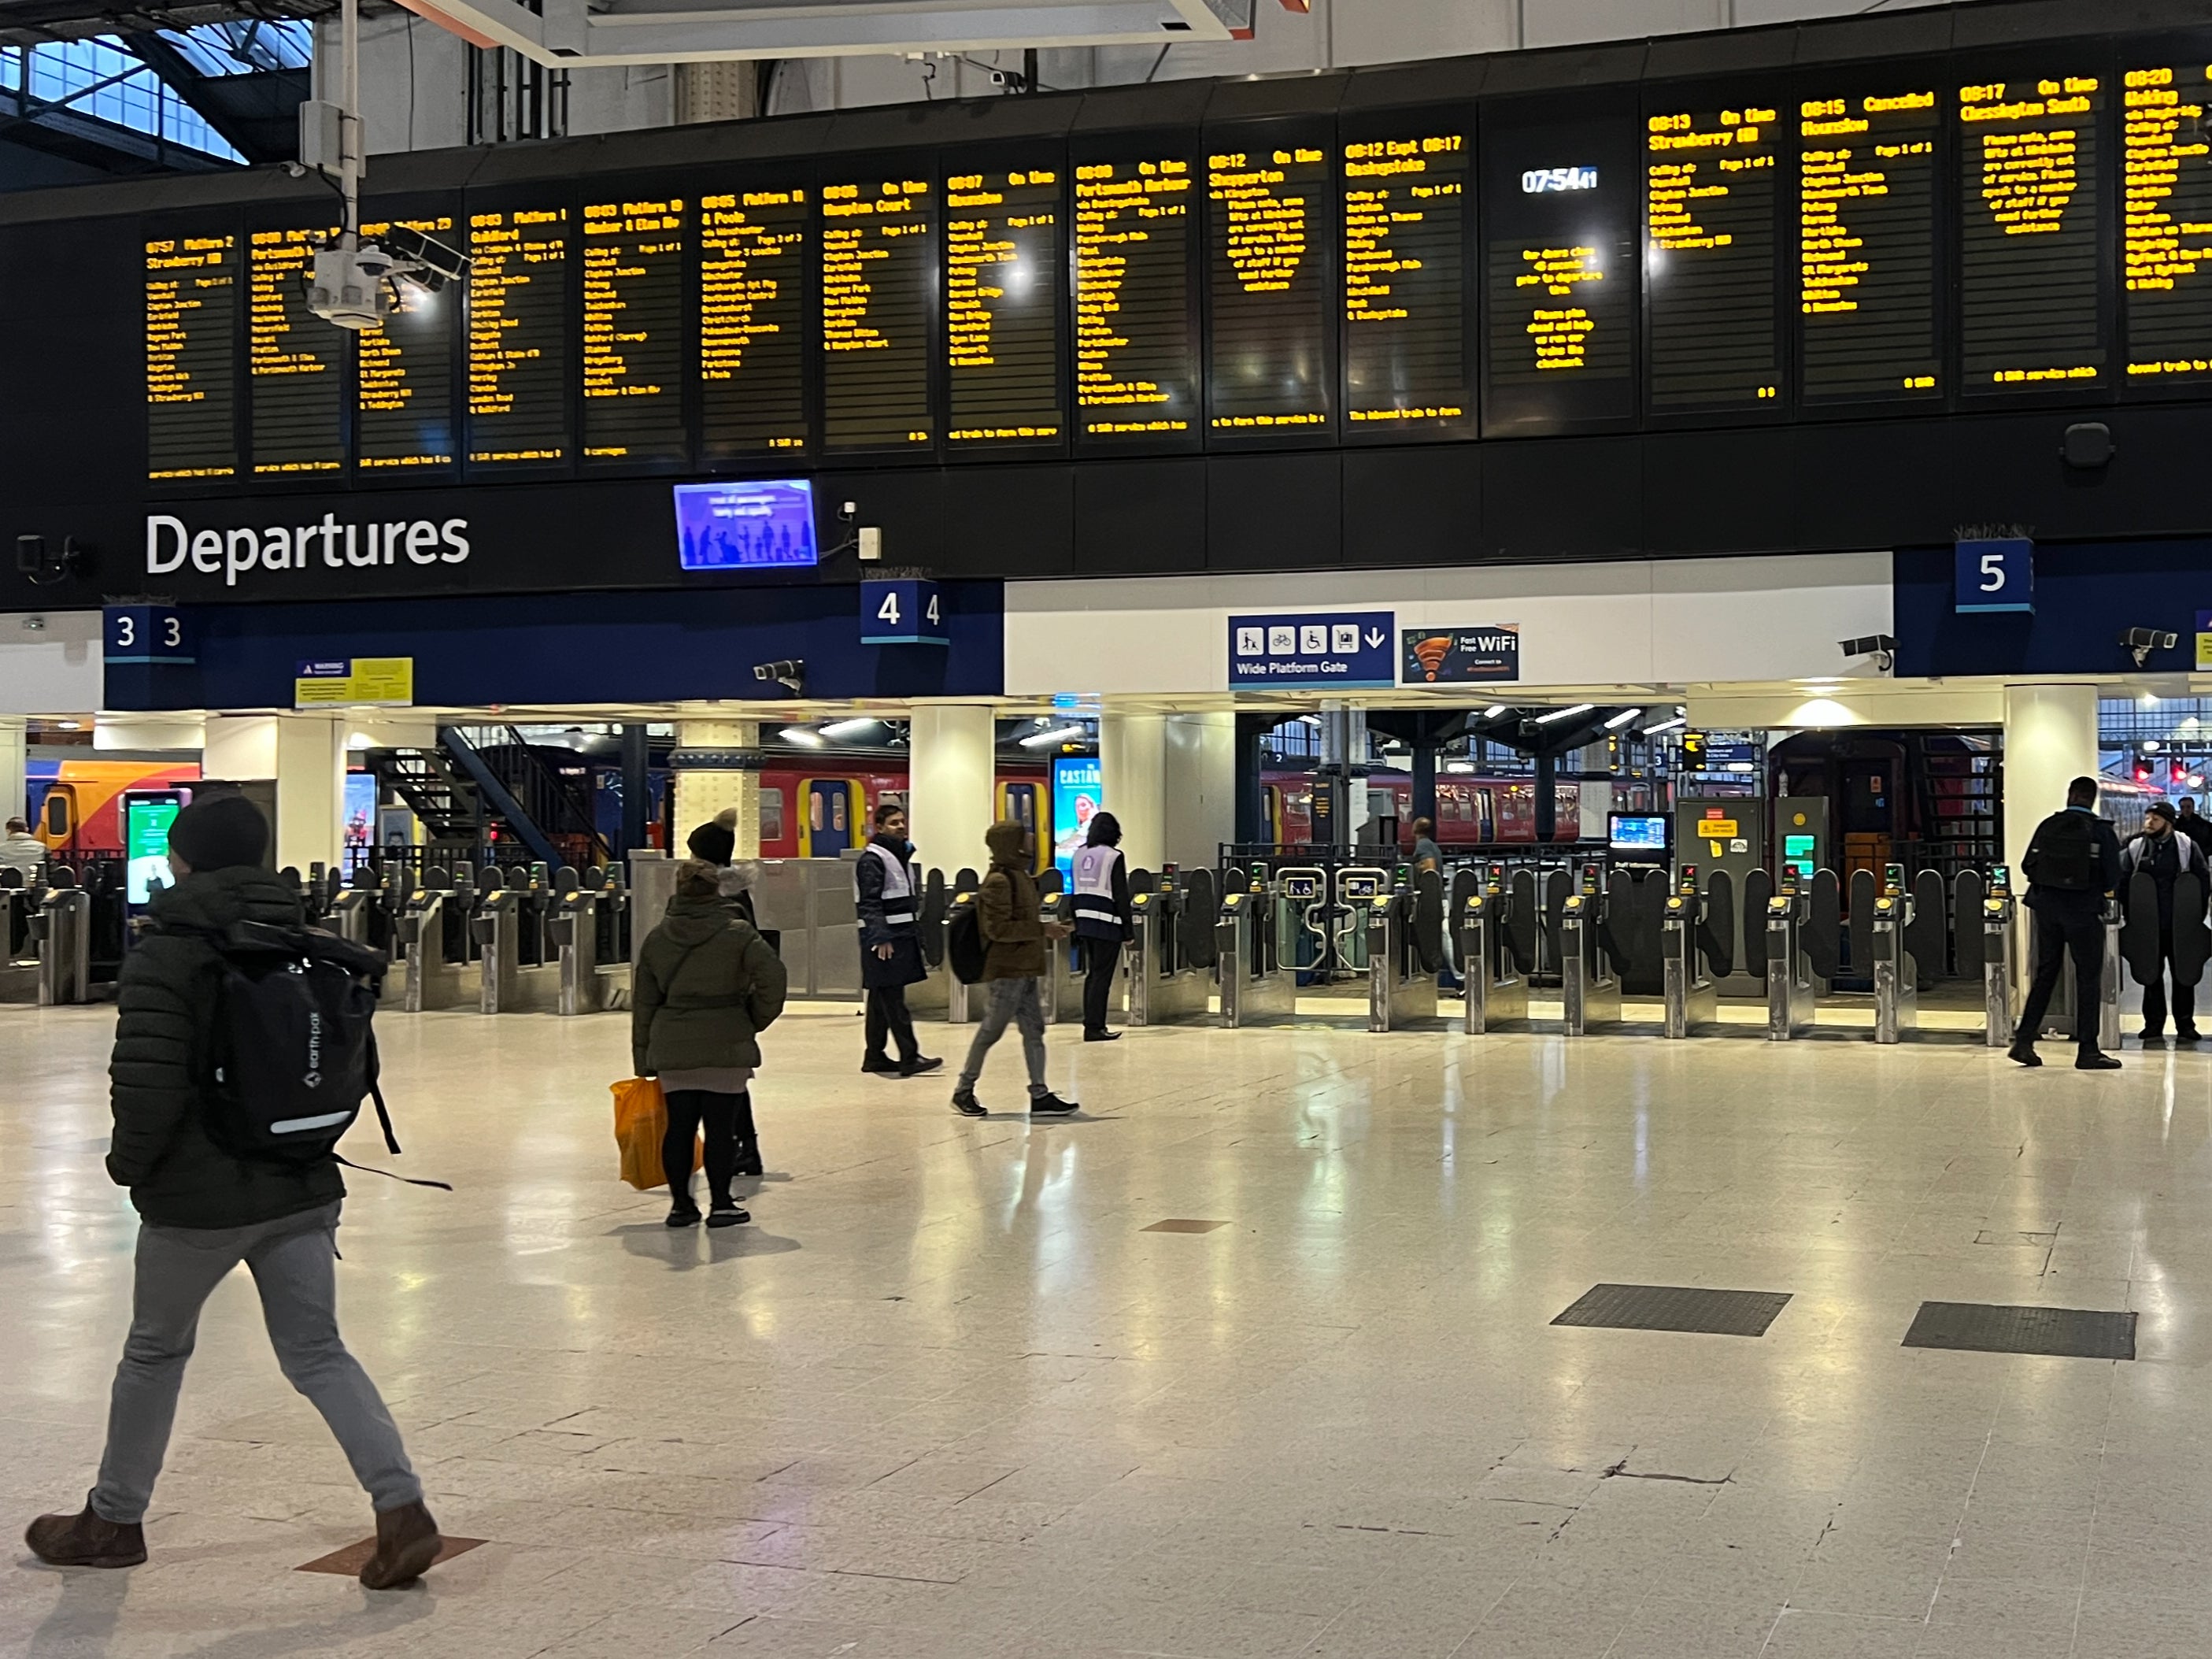 London Waterloo station: Cancellations continue on Wednesday morning